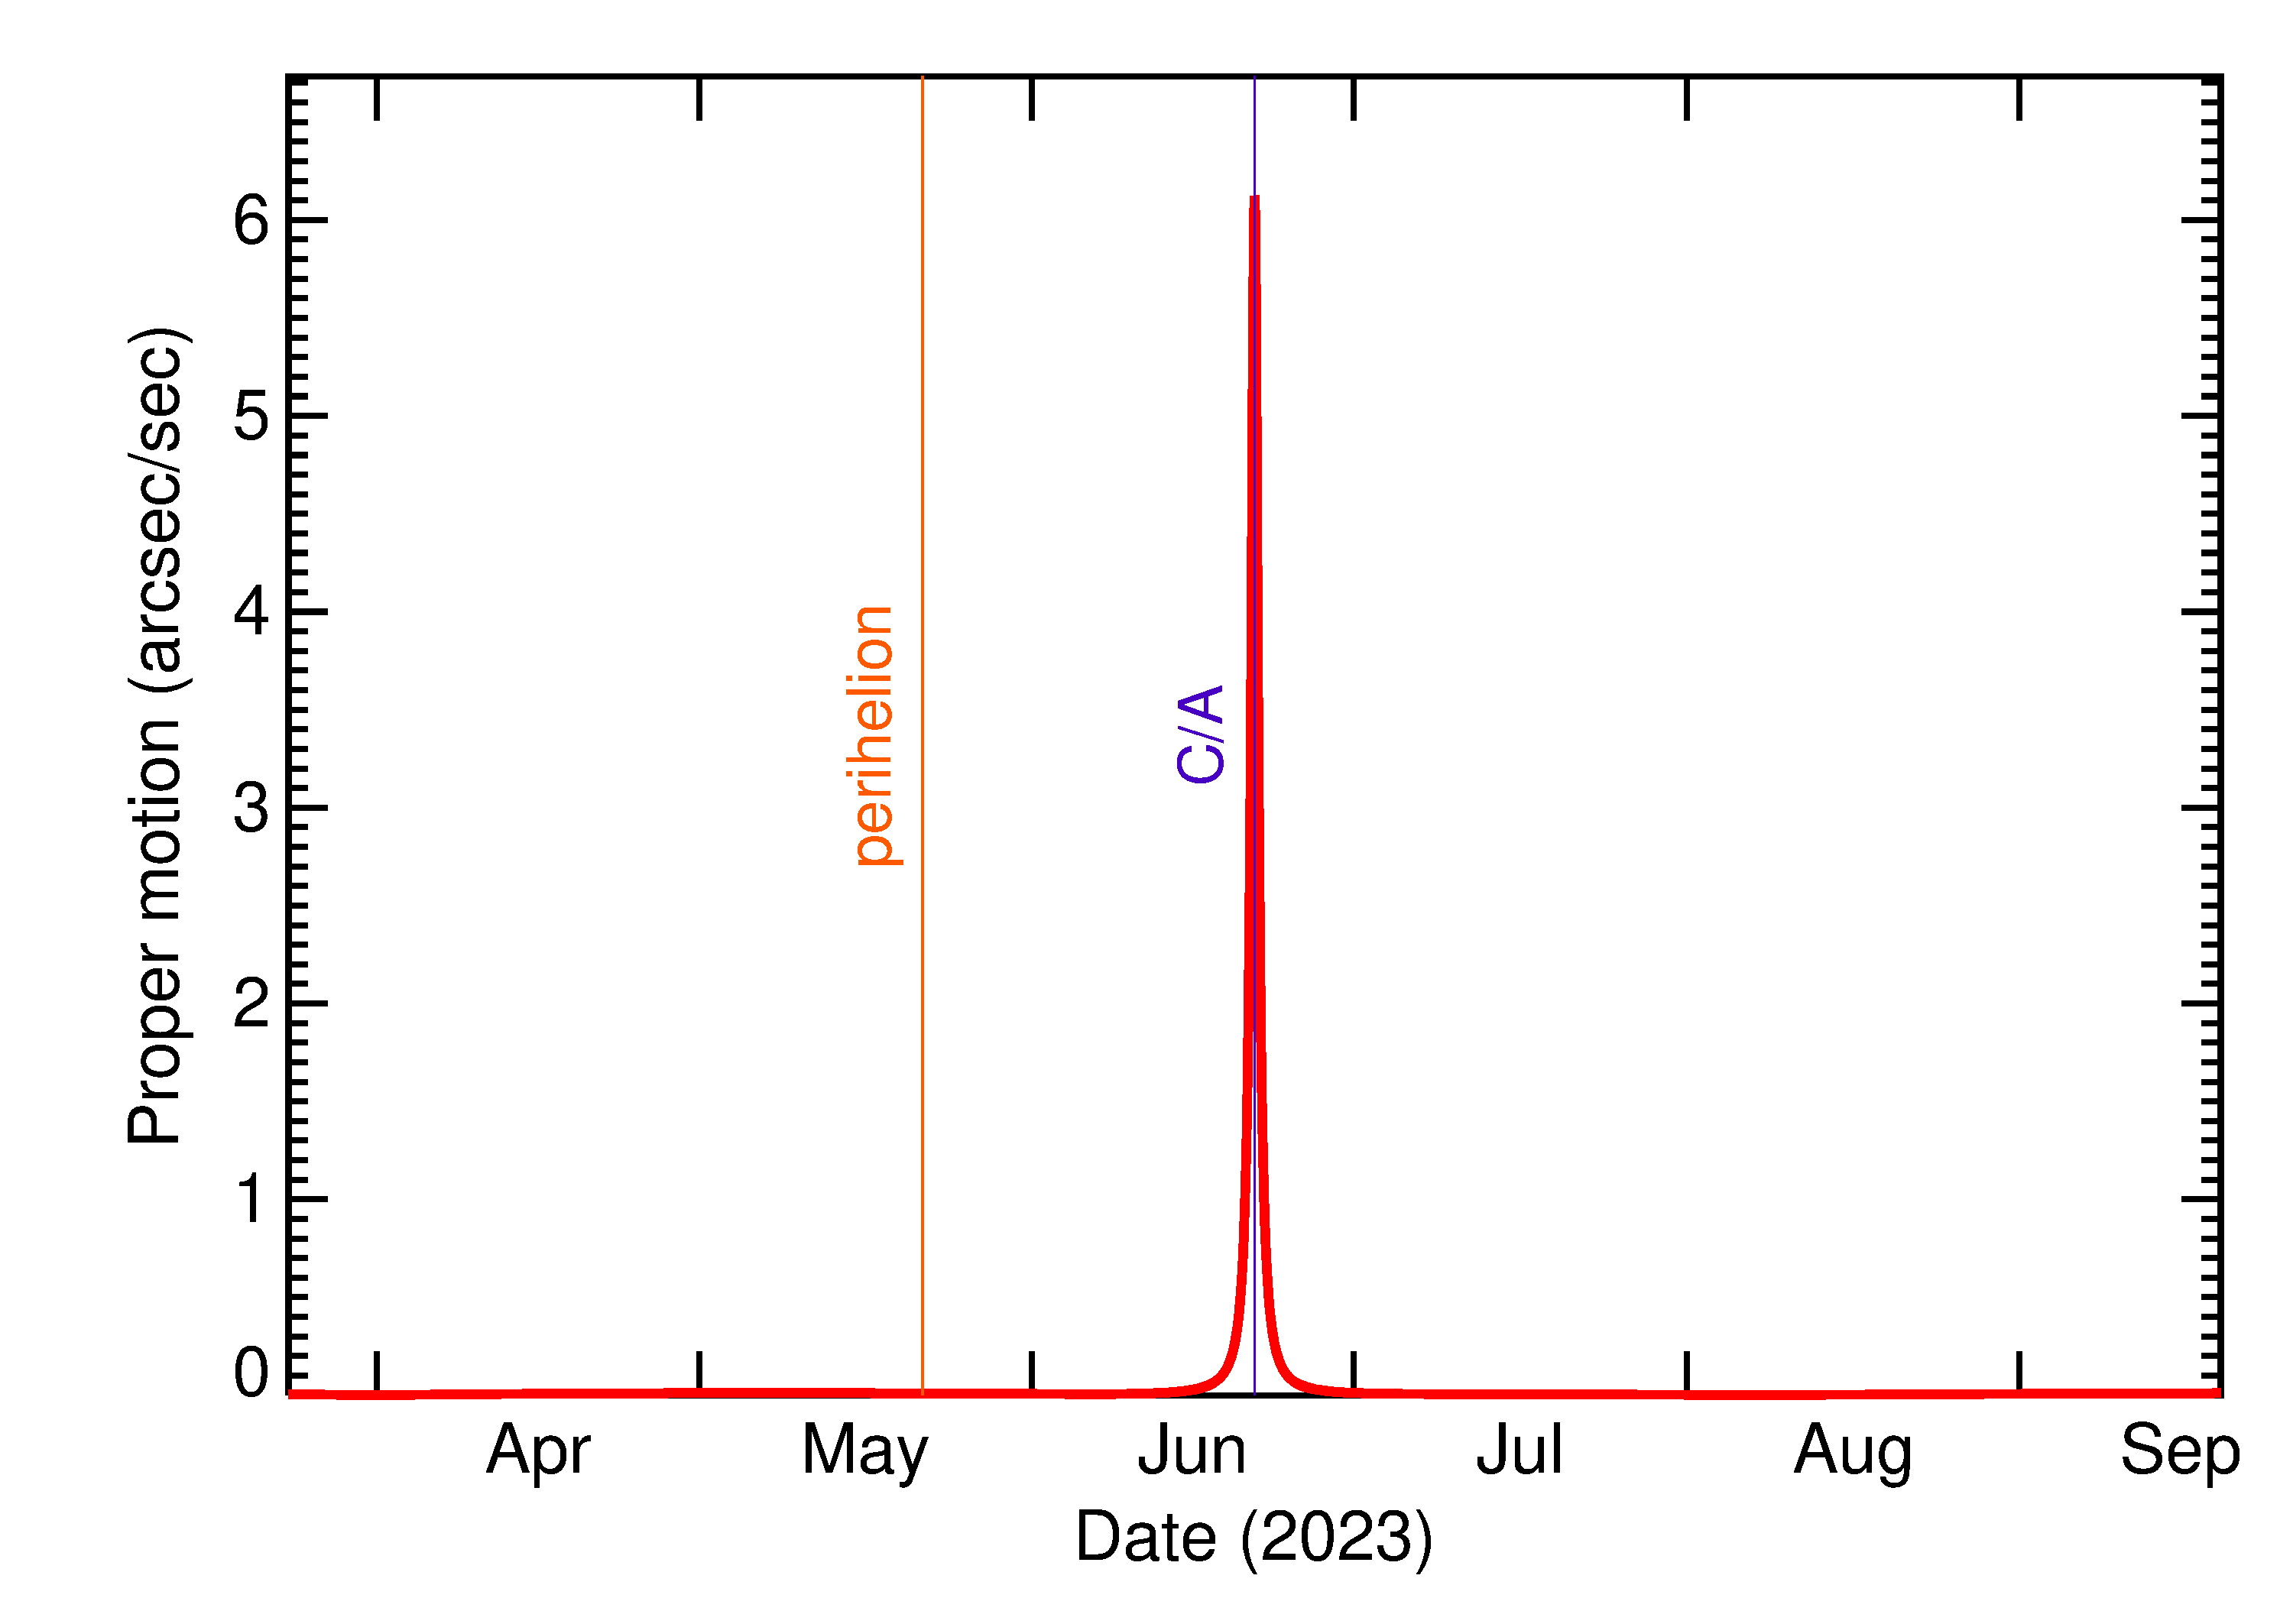 Proper motion rate of 2023 MD4 in the months around closest approach